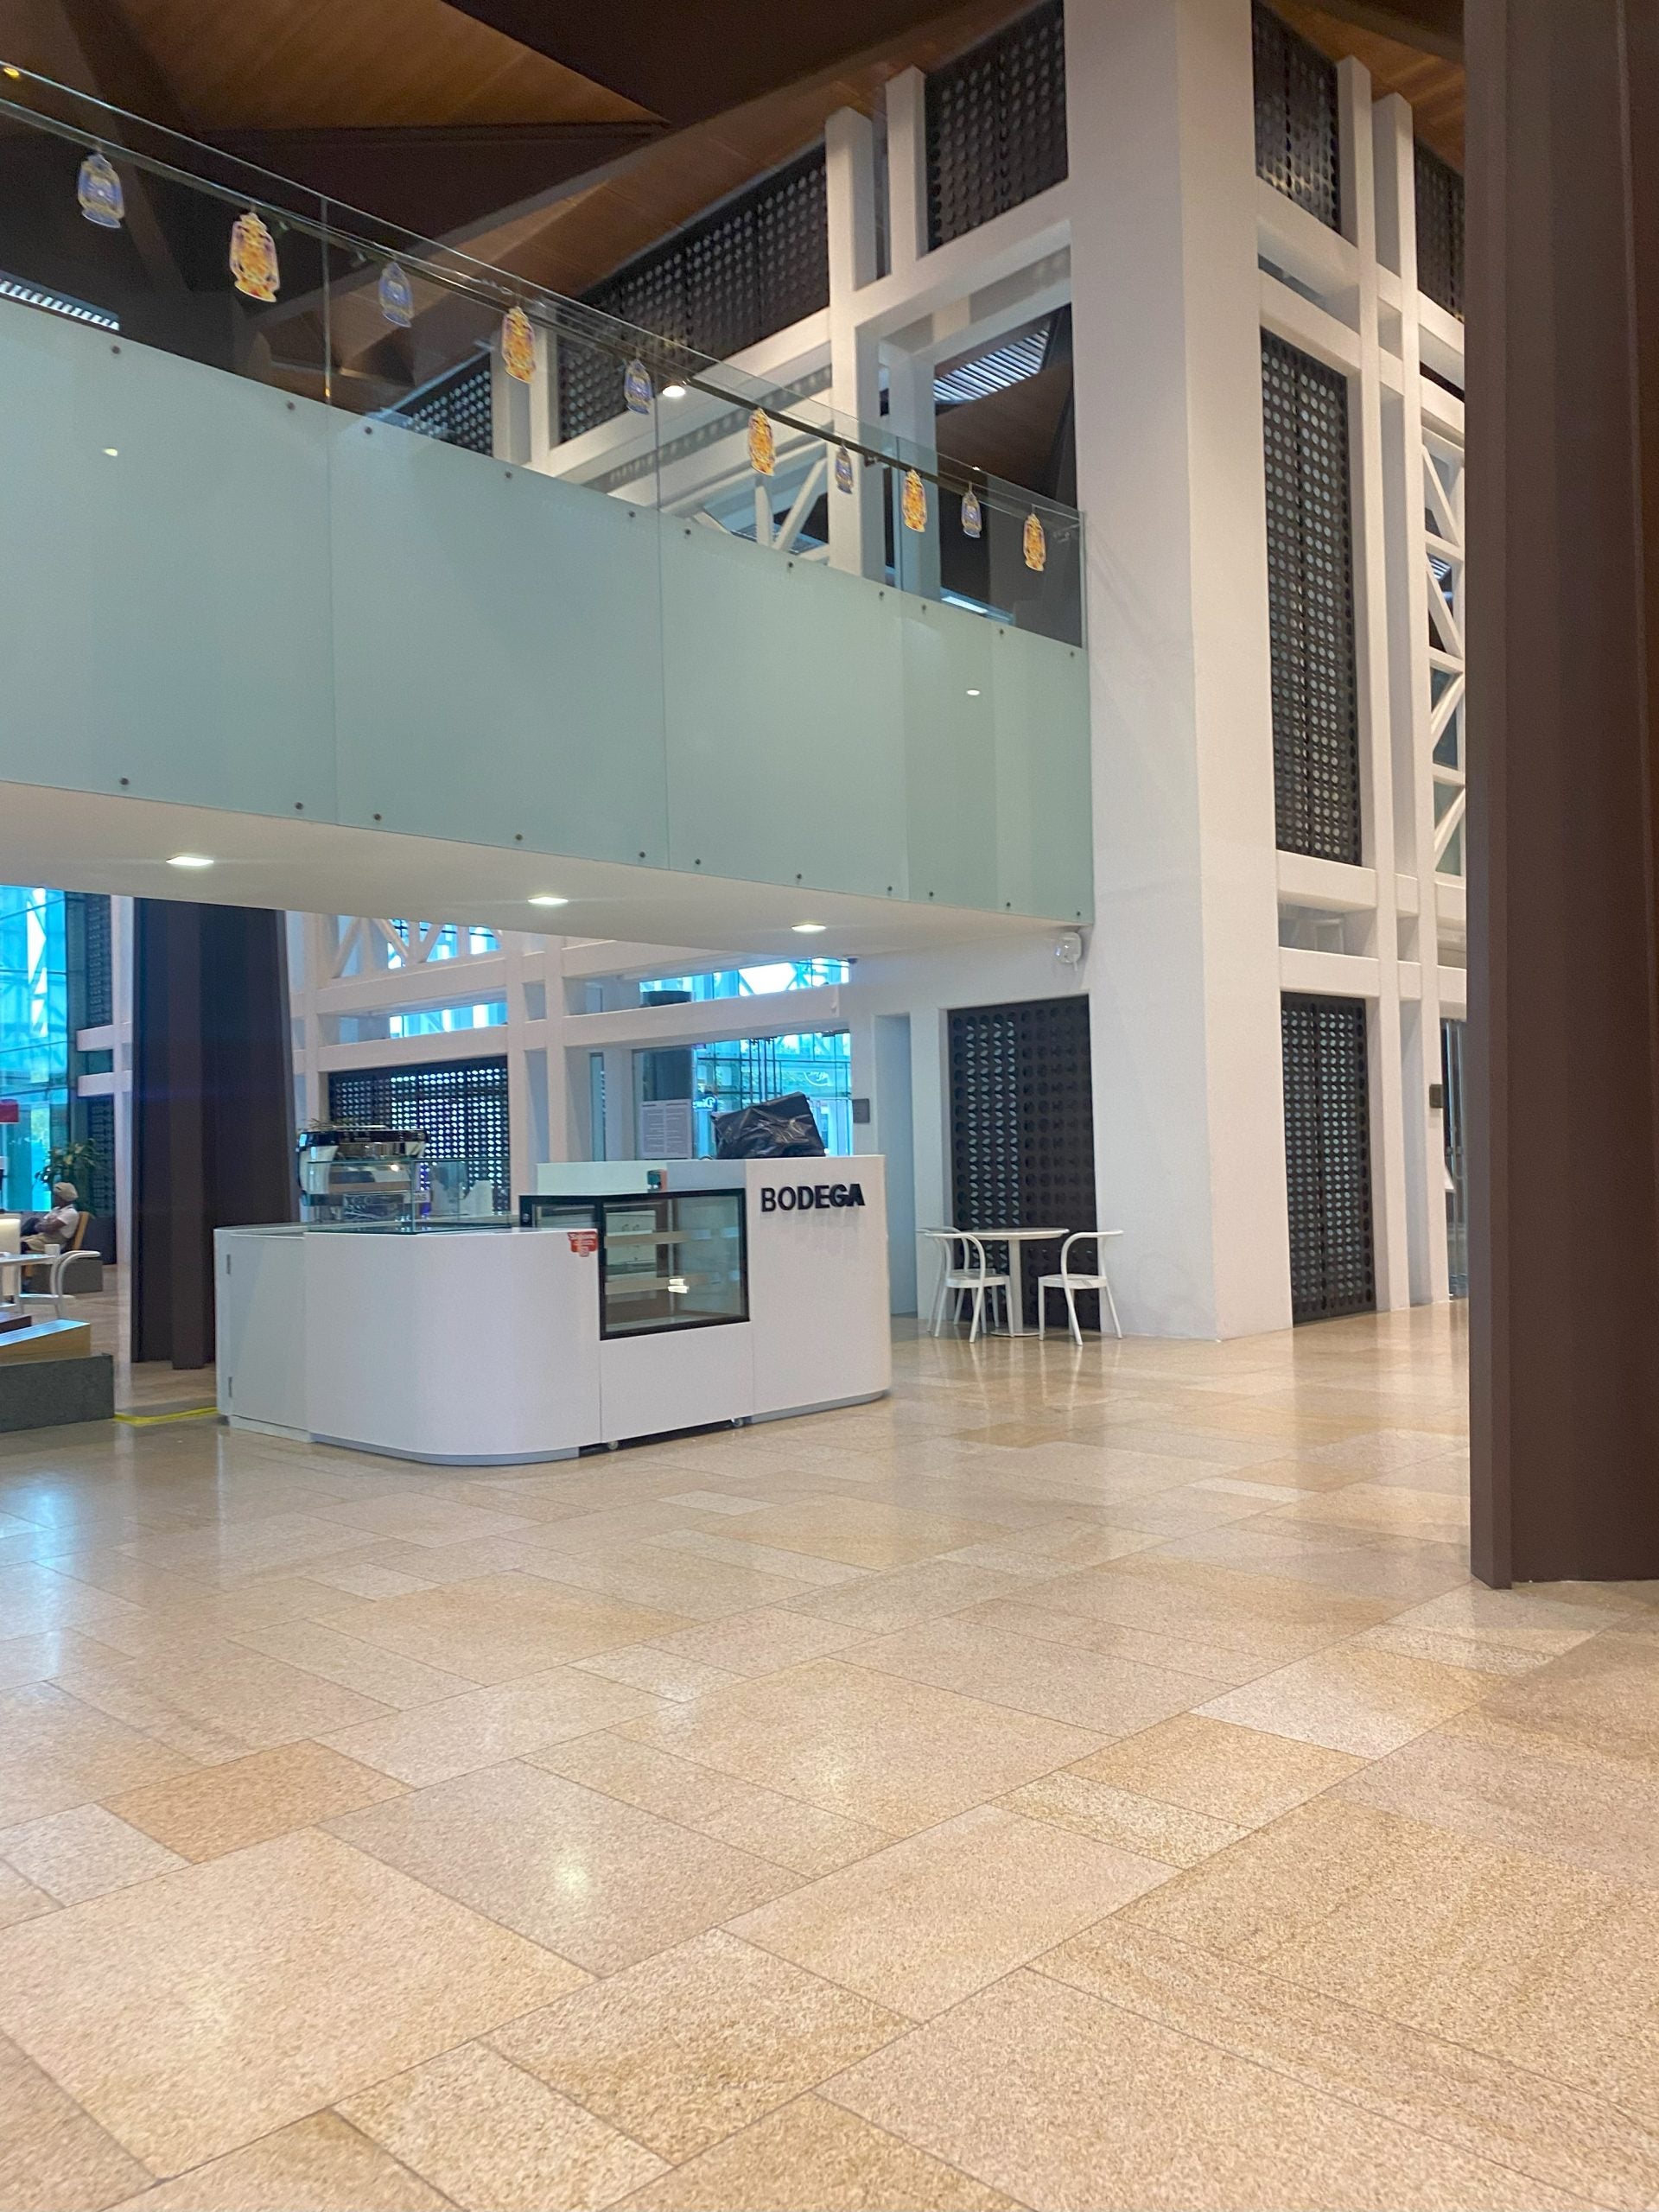 Interior of the Student Center in Qatar